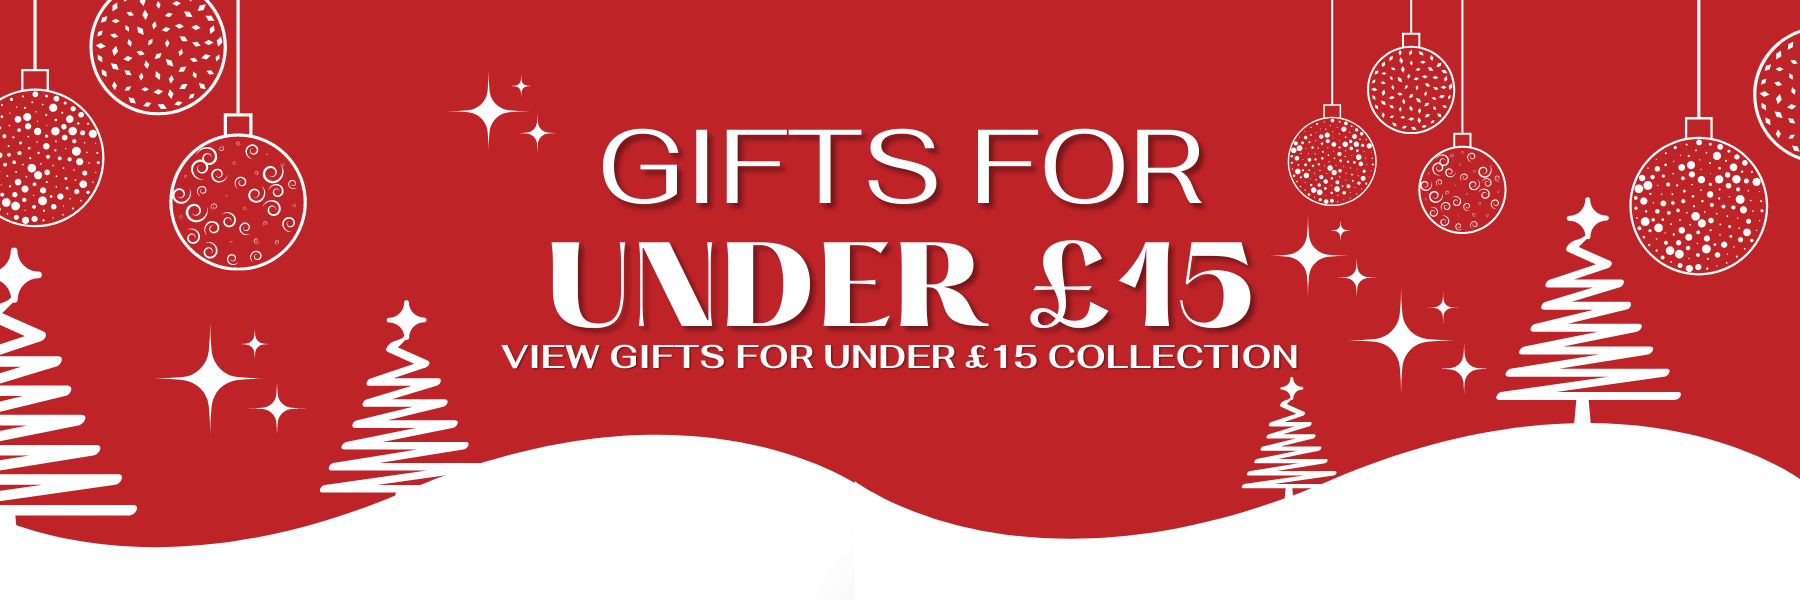 Christmas Gifts For Under £15